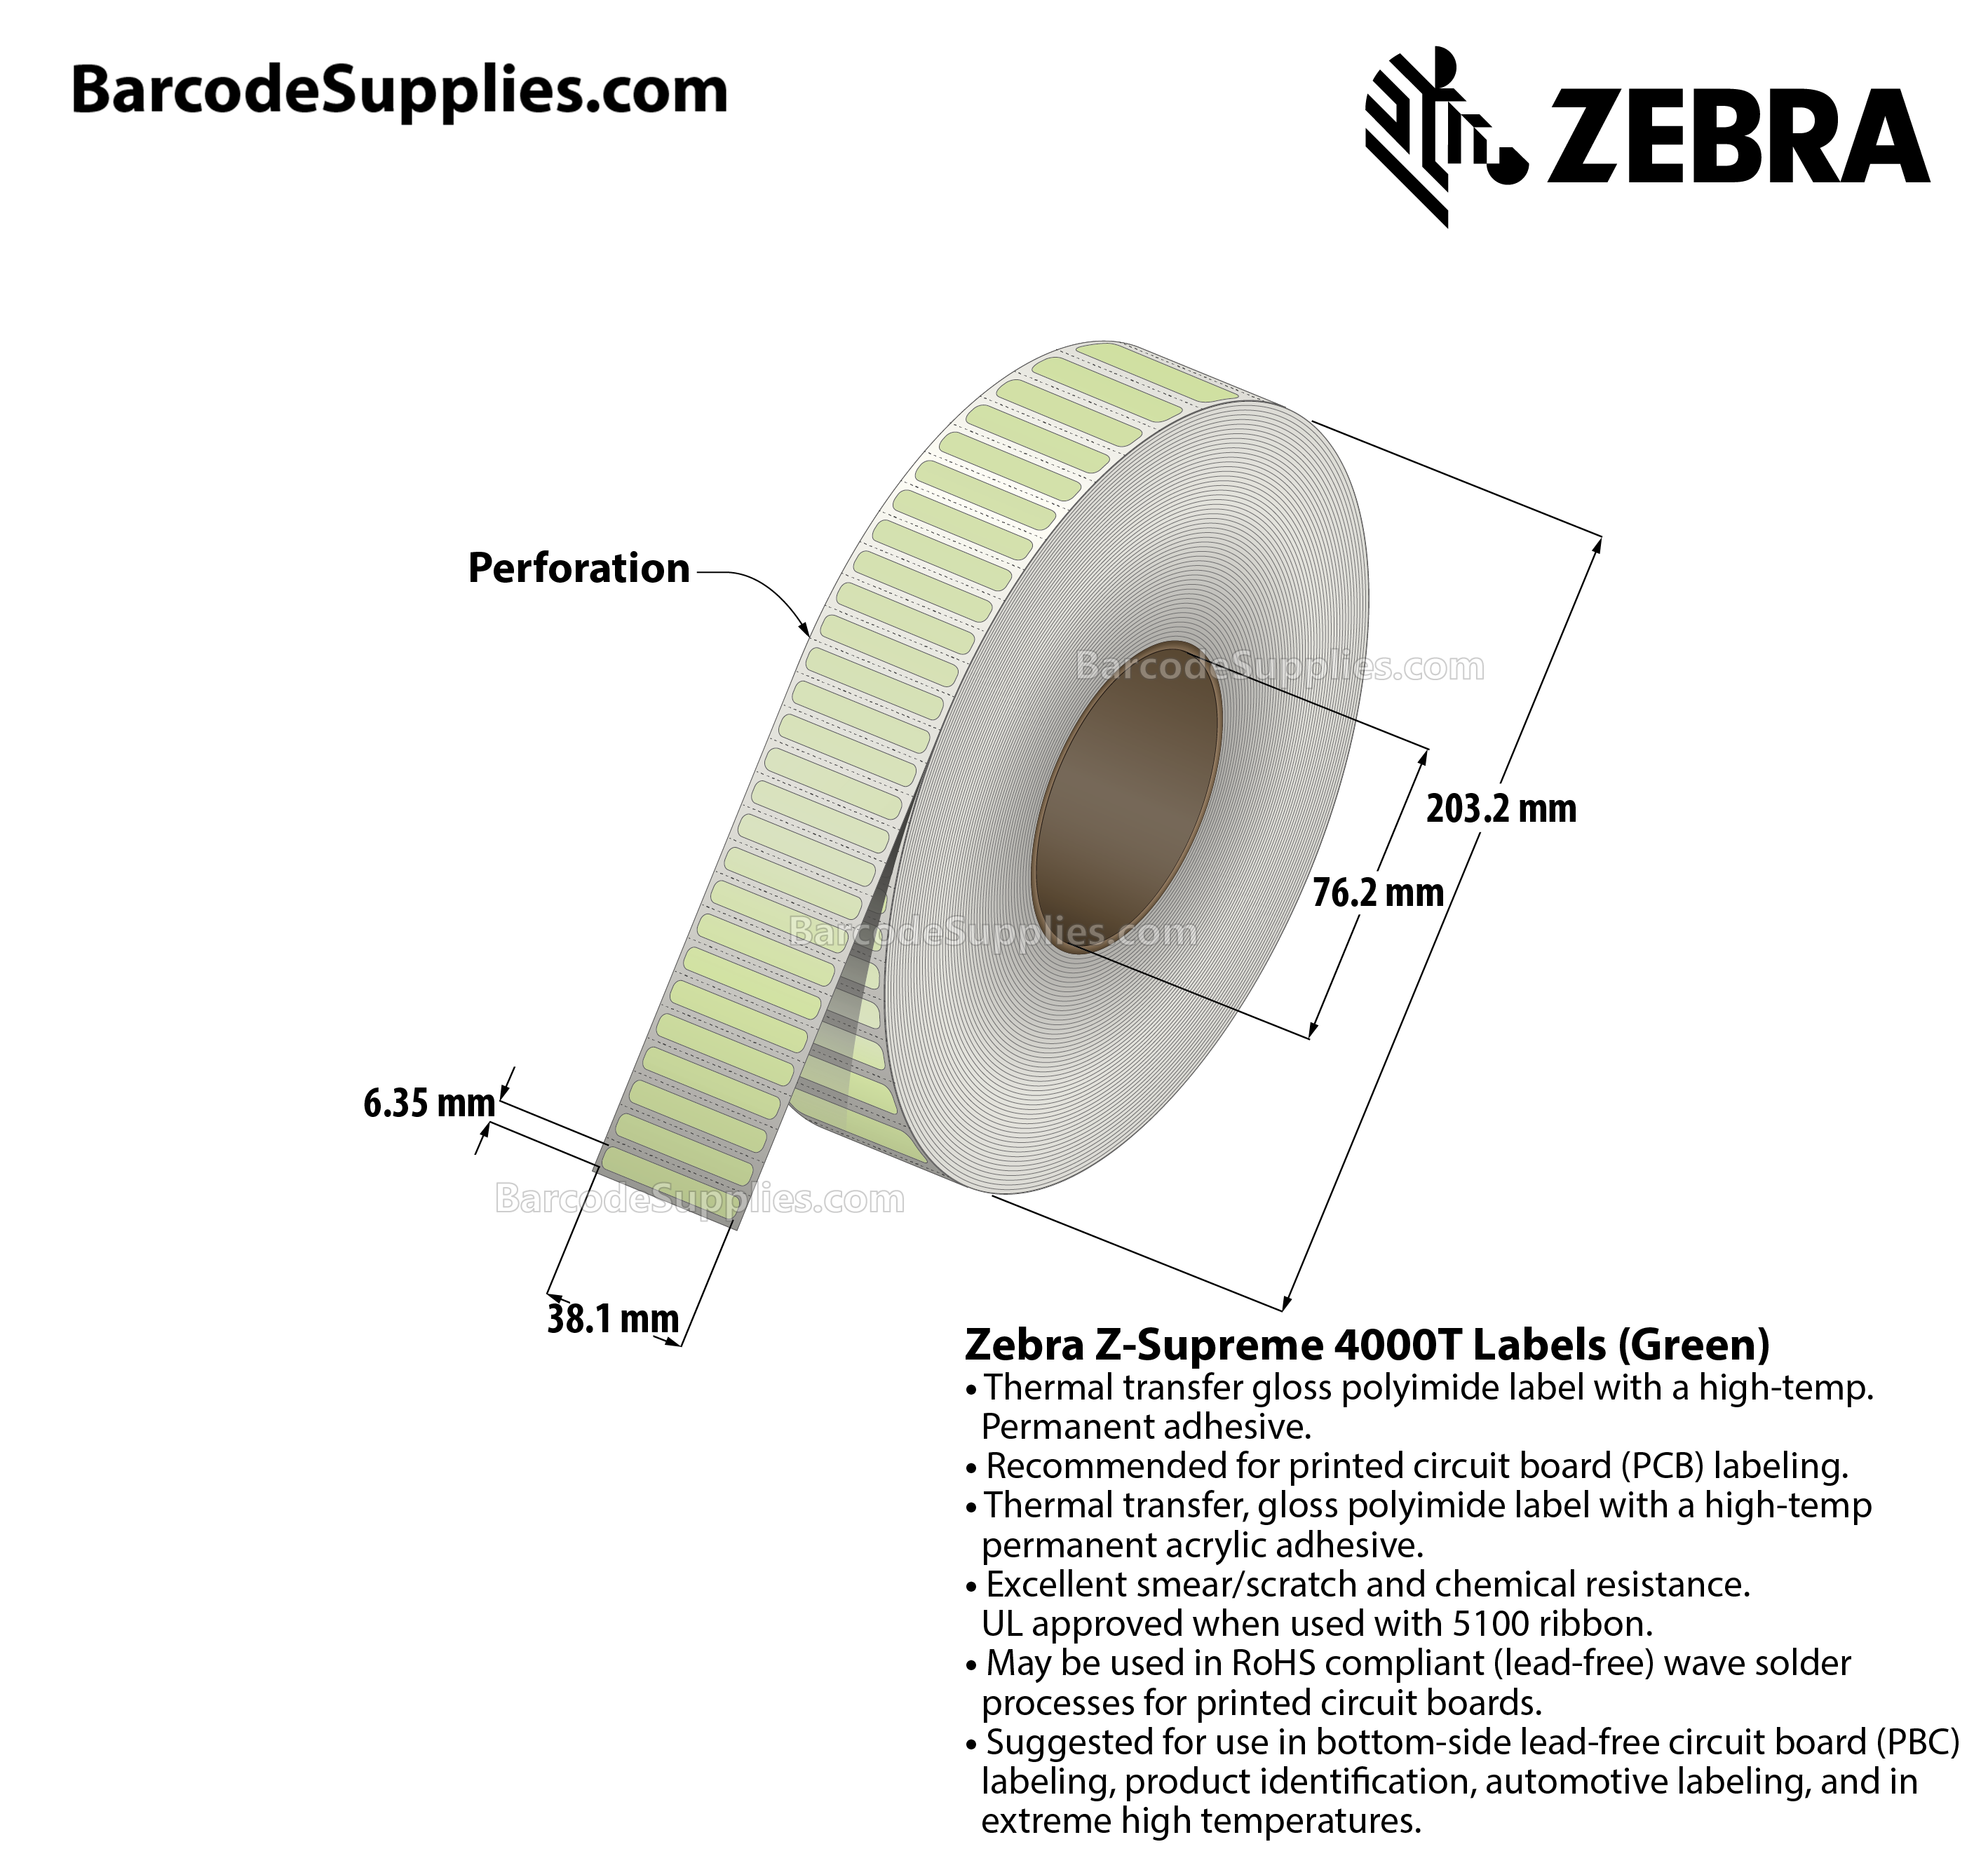 1.5 x 0.25 Thermal Transfer Green Z-Supreme 4000T Green Labels With High-temp Adhesive - Perforated - 10000 Labels Per Roll - Carton Of 1 Rolls - 10000 Labels Total - MPN: 10023320